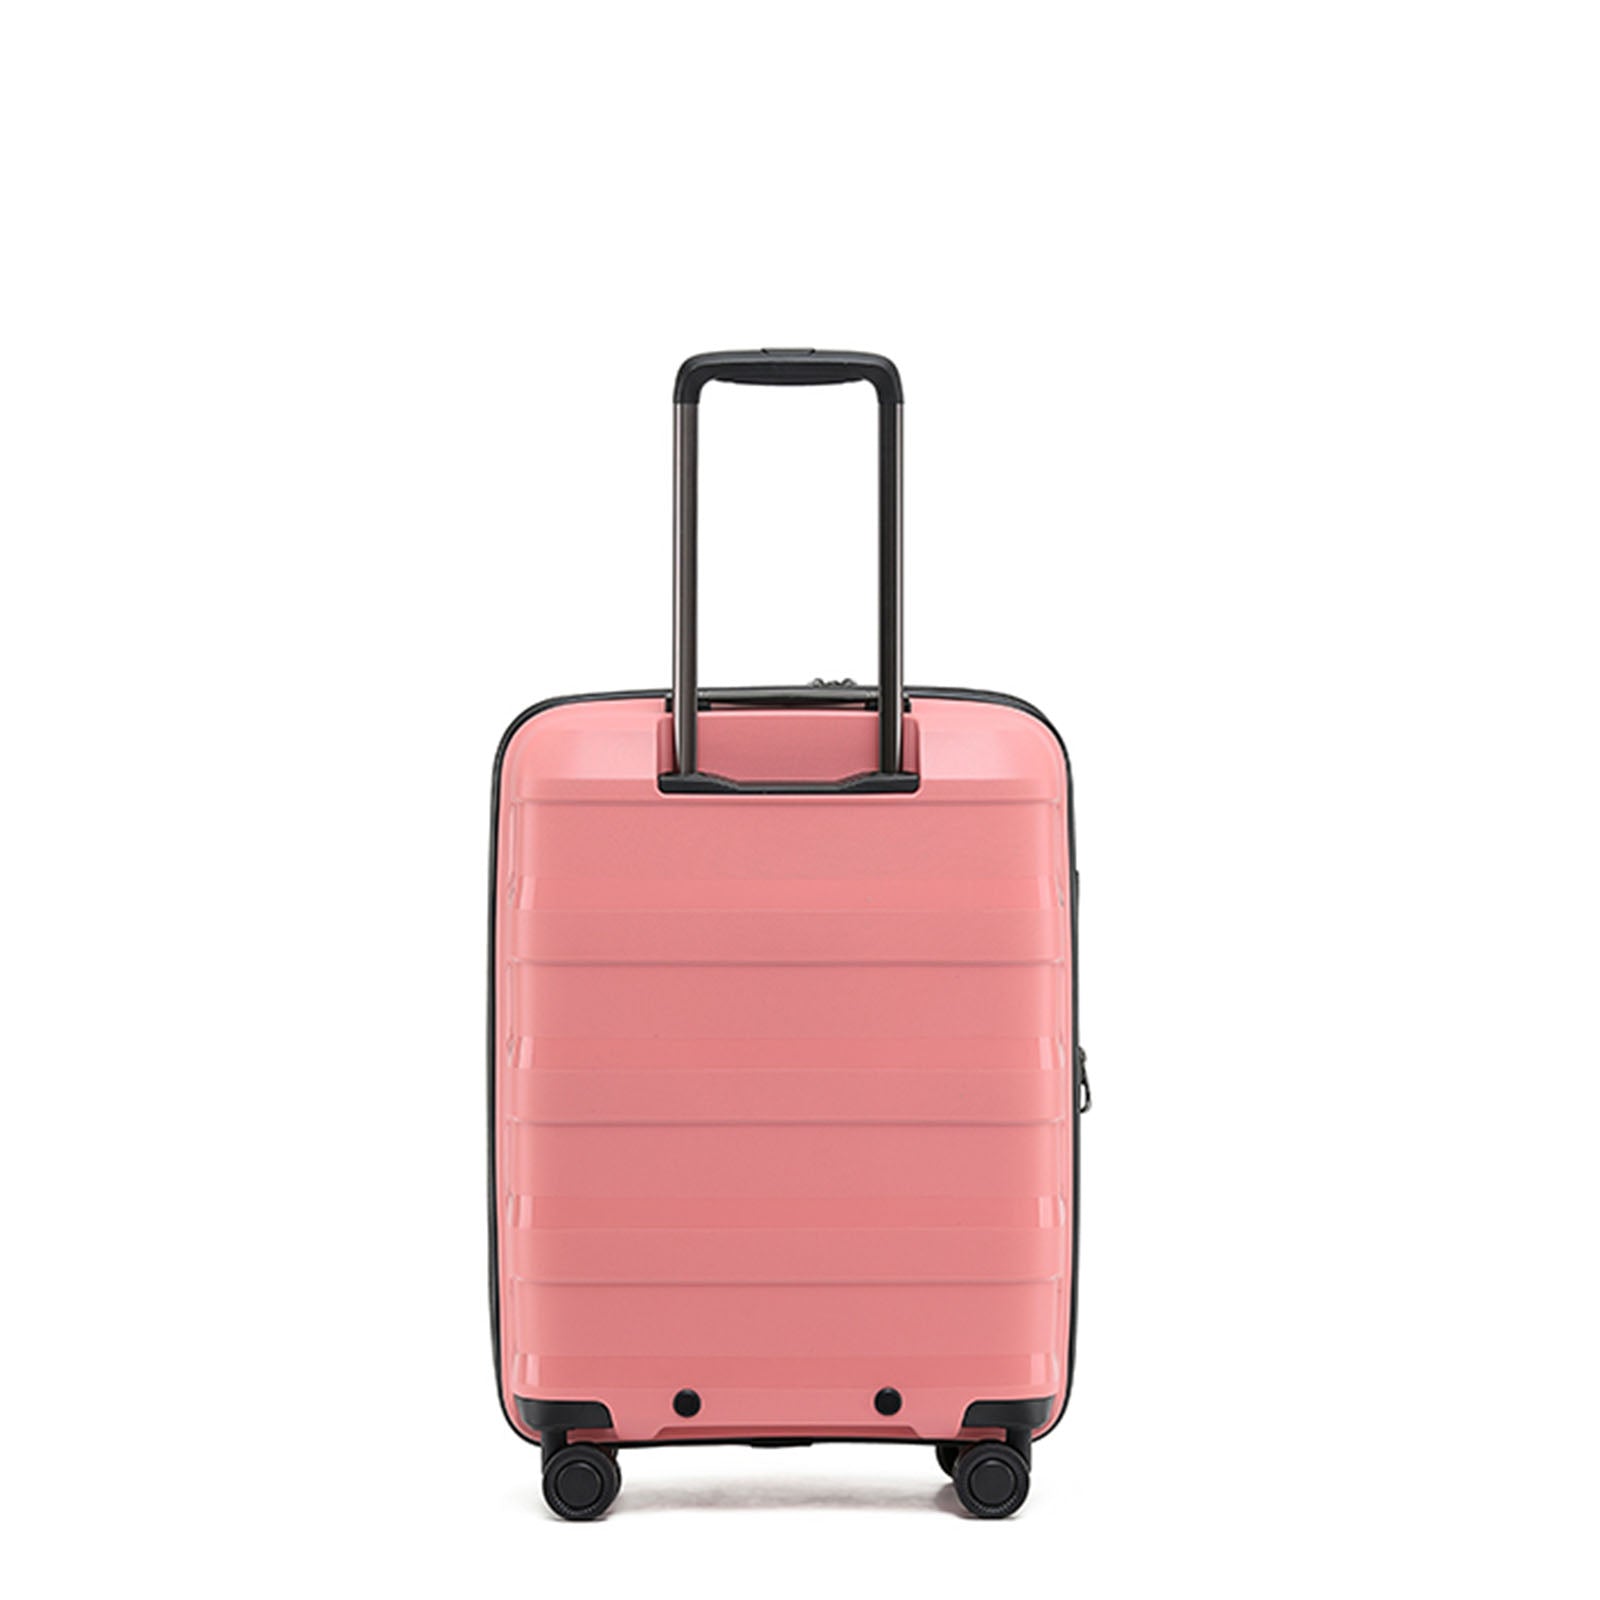 Tosca Comet 4 Wheel 55cm Carry-On Suitcase Coral